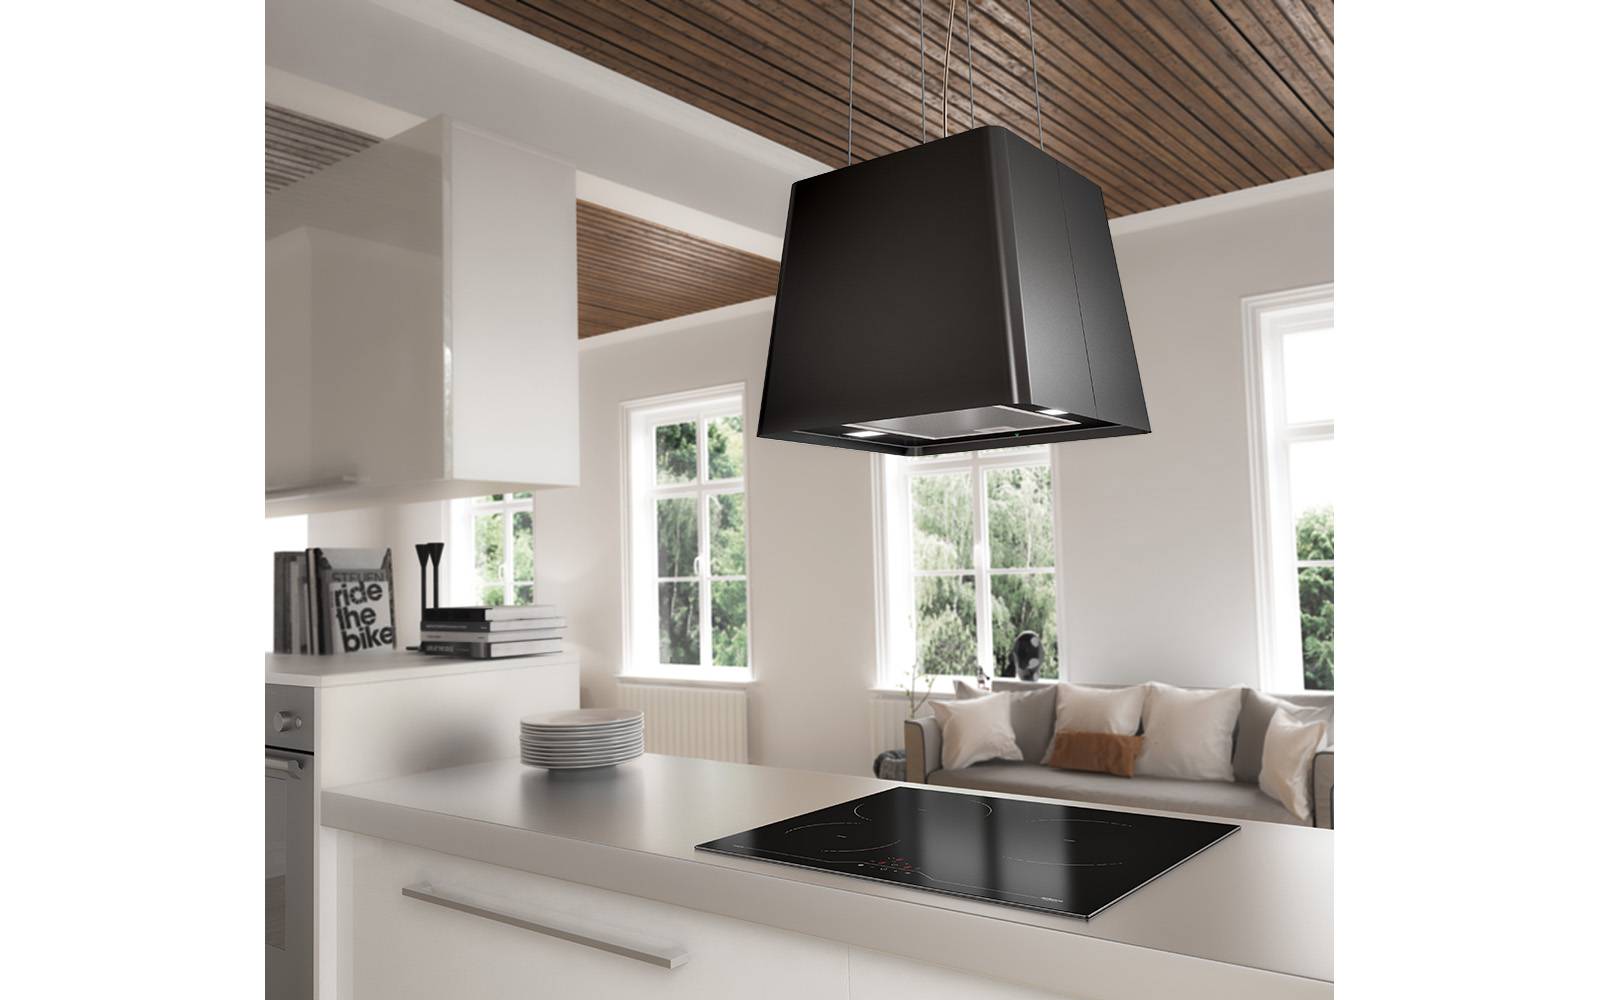 Airforce F164 50cm Island Cooker Hood in Satin Black Finish